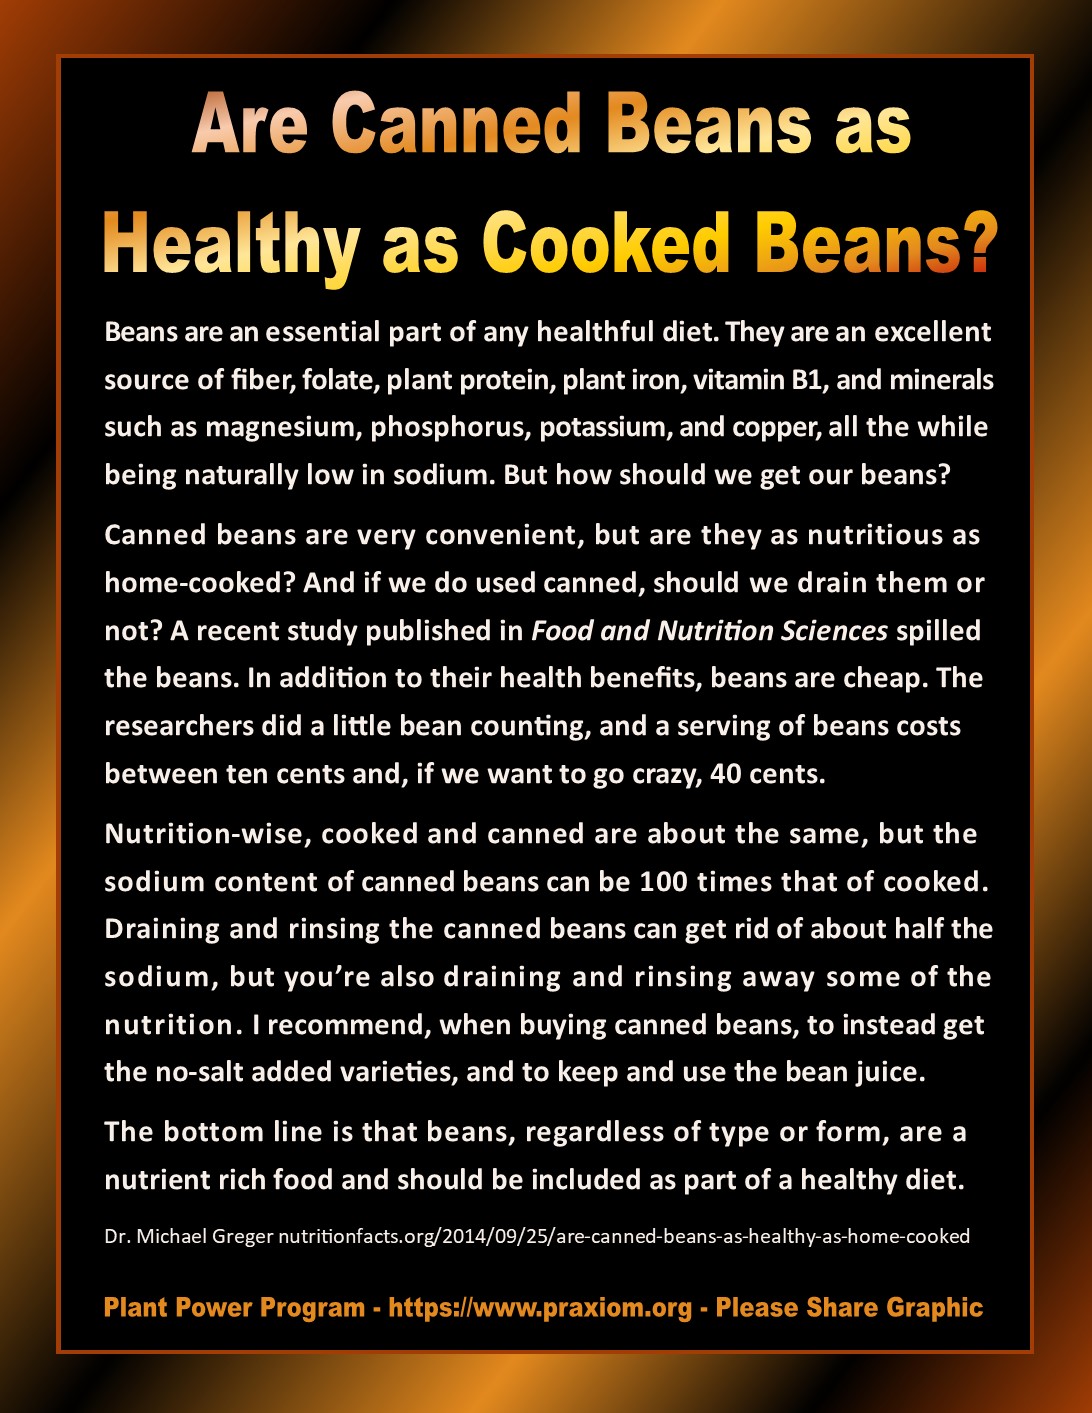 Are canned beans as healthy as cooked beans?